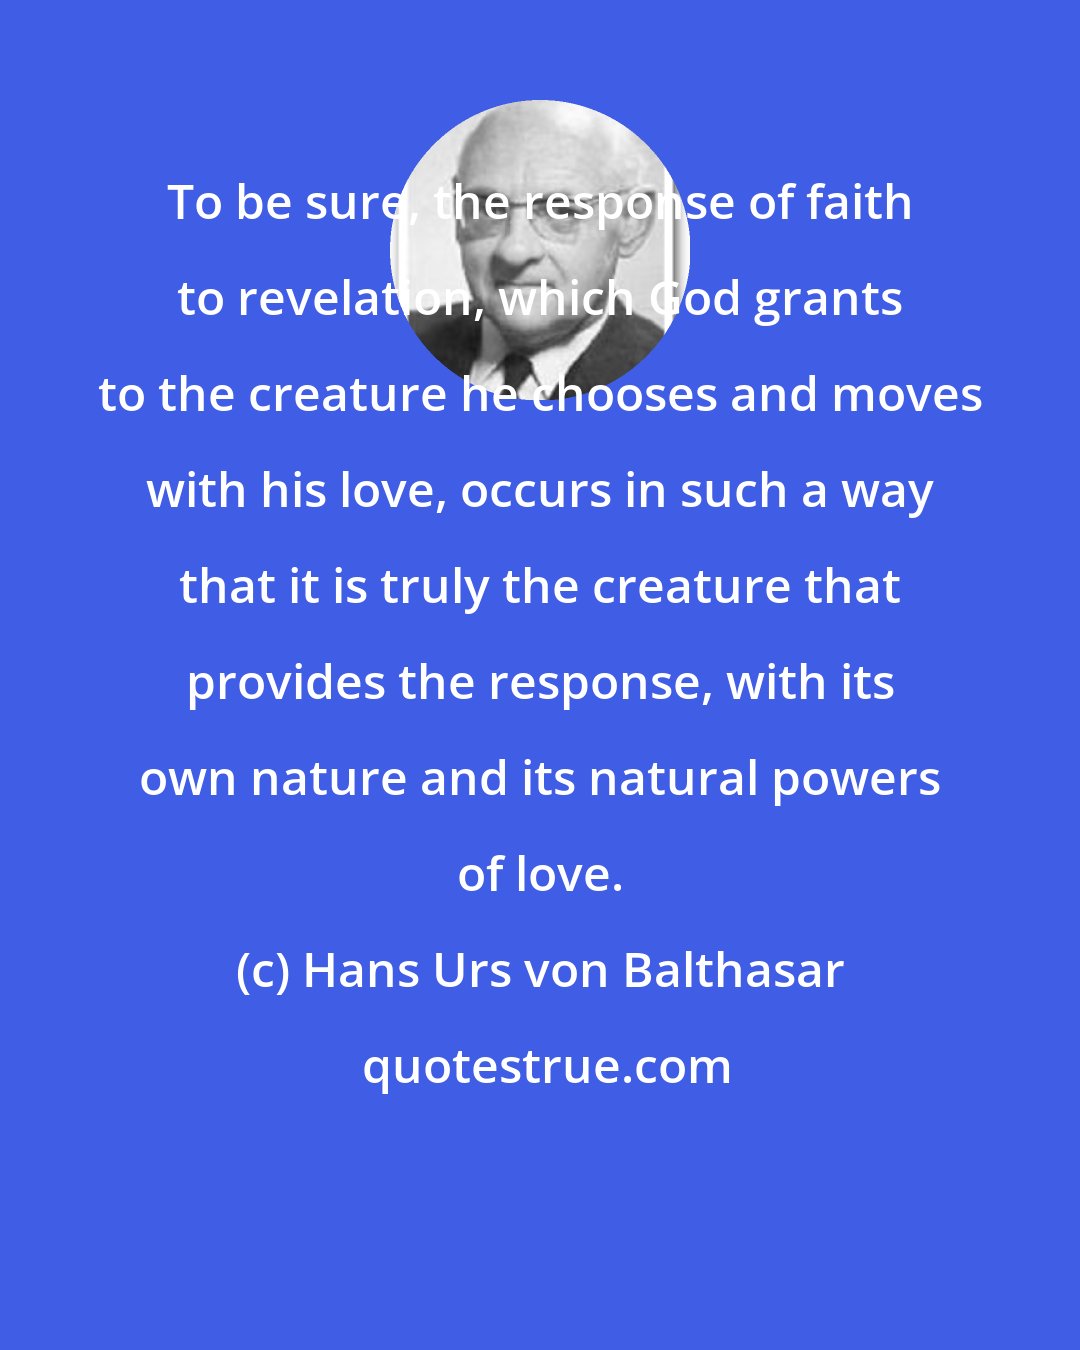 Hans Urs von Balthasar: To be sure, the response of faith to revelation, which God grants to the creature he chooses and moves with his love, occurs in such a way that it is truly the creature that provides the response, with its own nature and its natural powers of love.